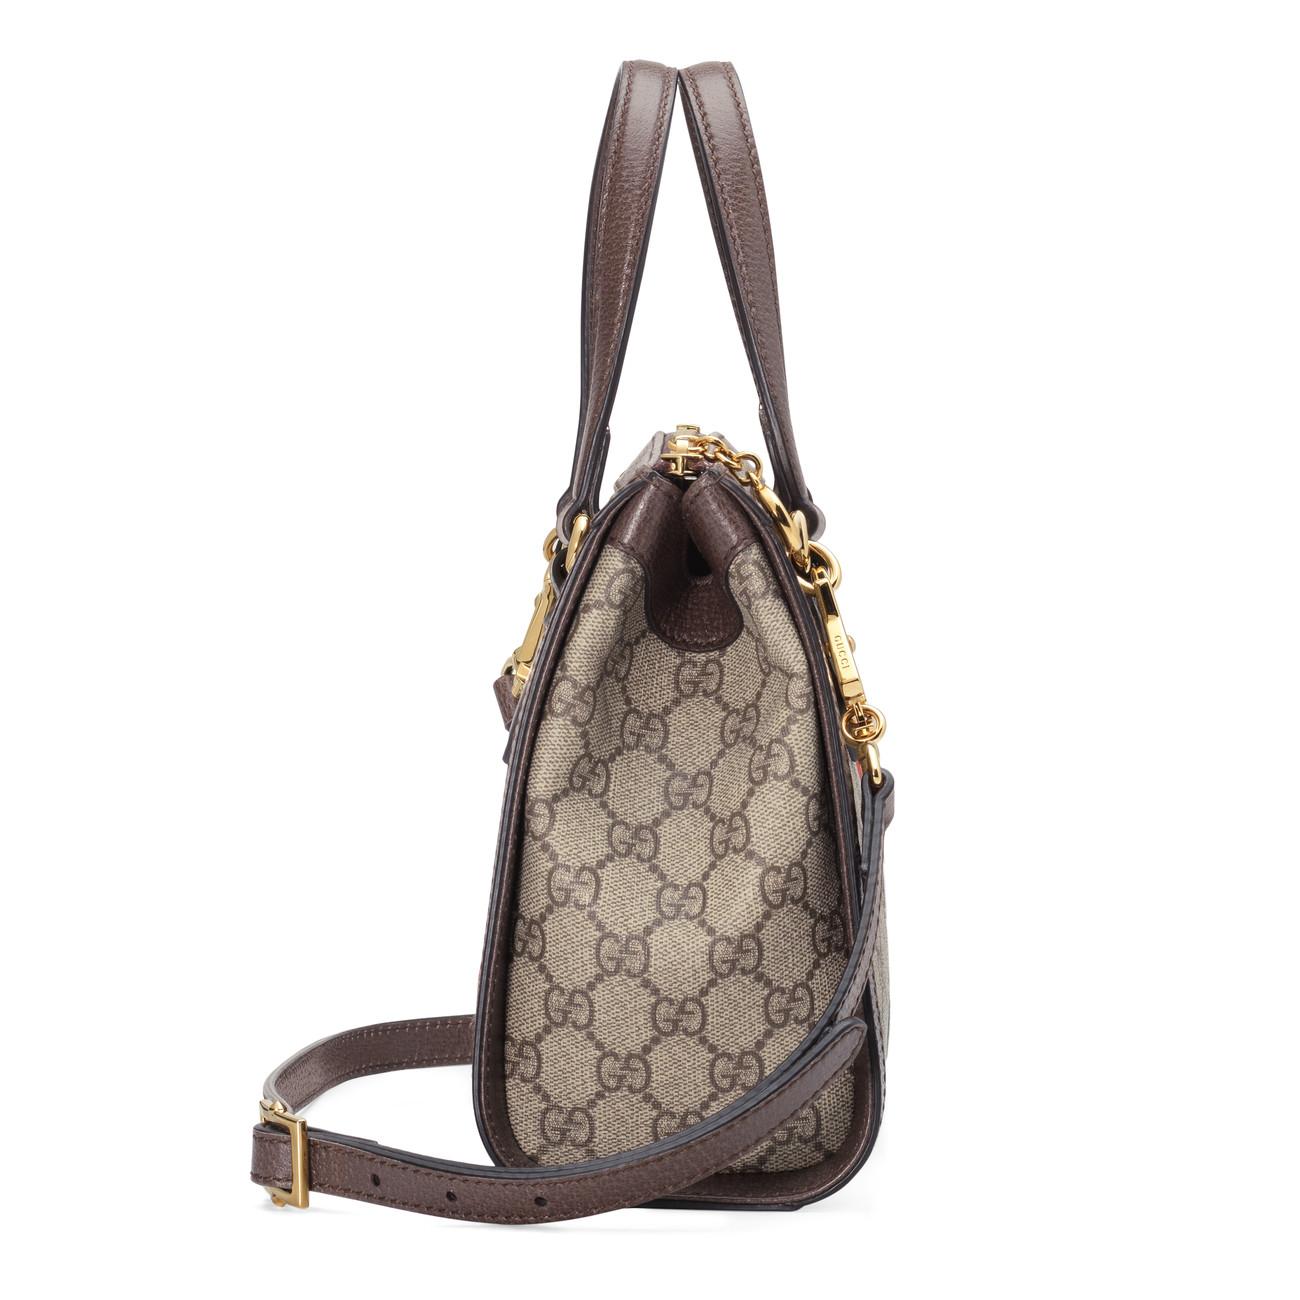 Gucci Canvas Ophidia Small GG Tote Bag in Green - Lyst